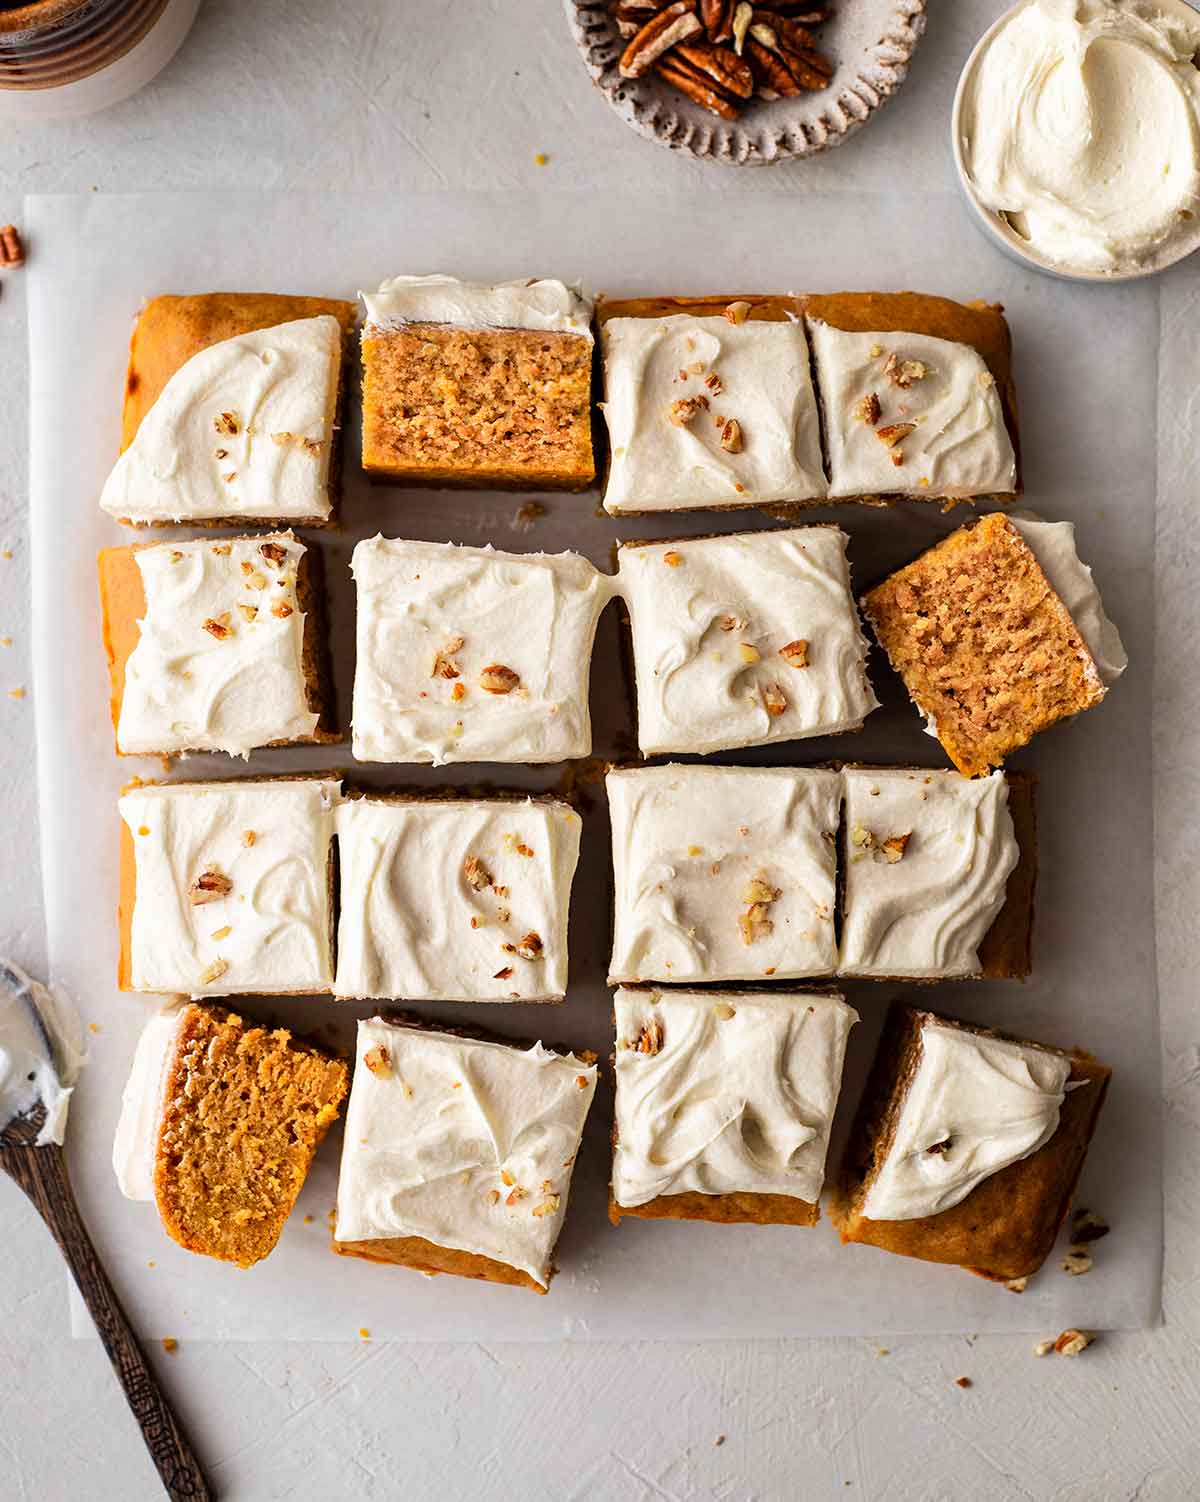 Flatlay of vegan sweet potato cake with creamy frosting cut into 16 squares.